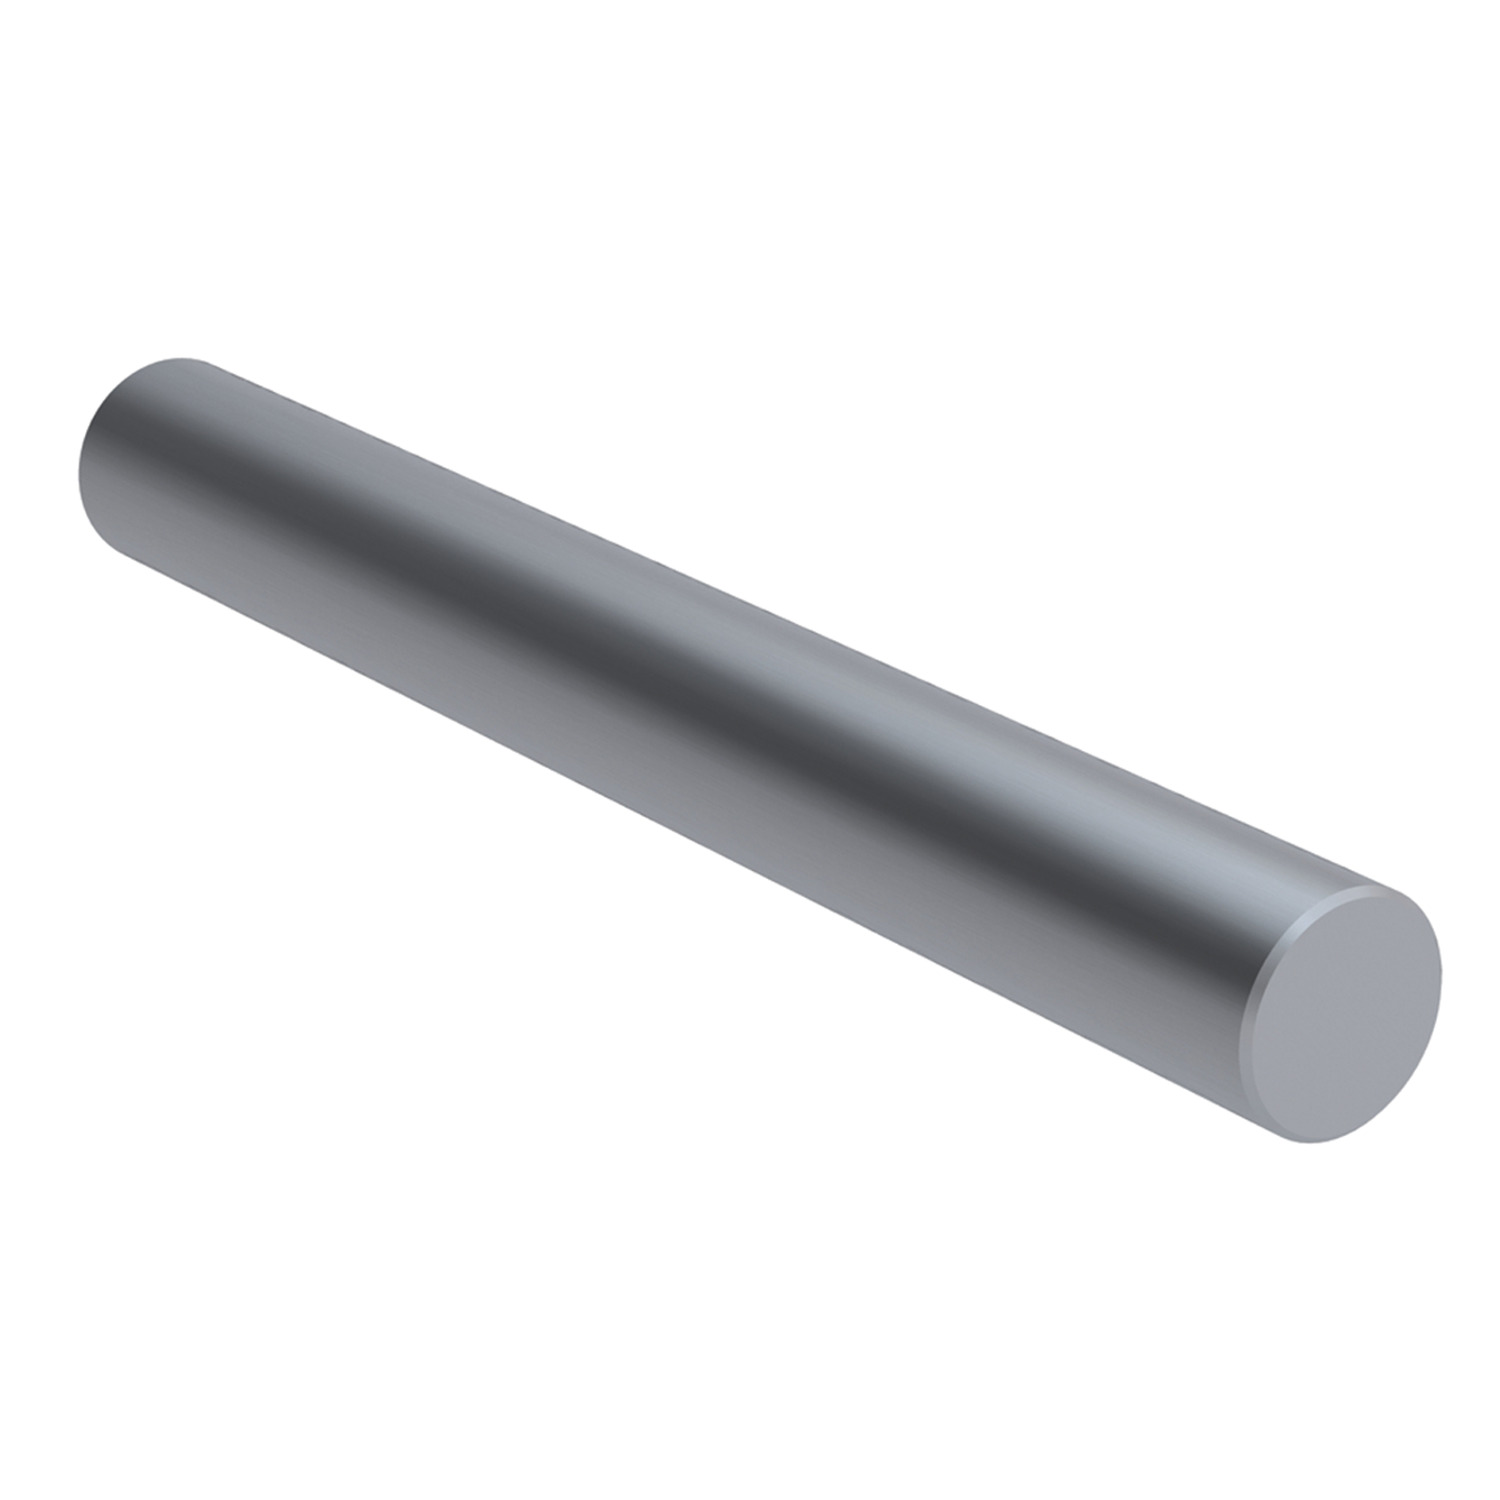 Ø6 Hardened Stainless Shafts Hardened corrosion resistant (stainless) steel linear shafts for linear bearings.